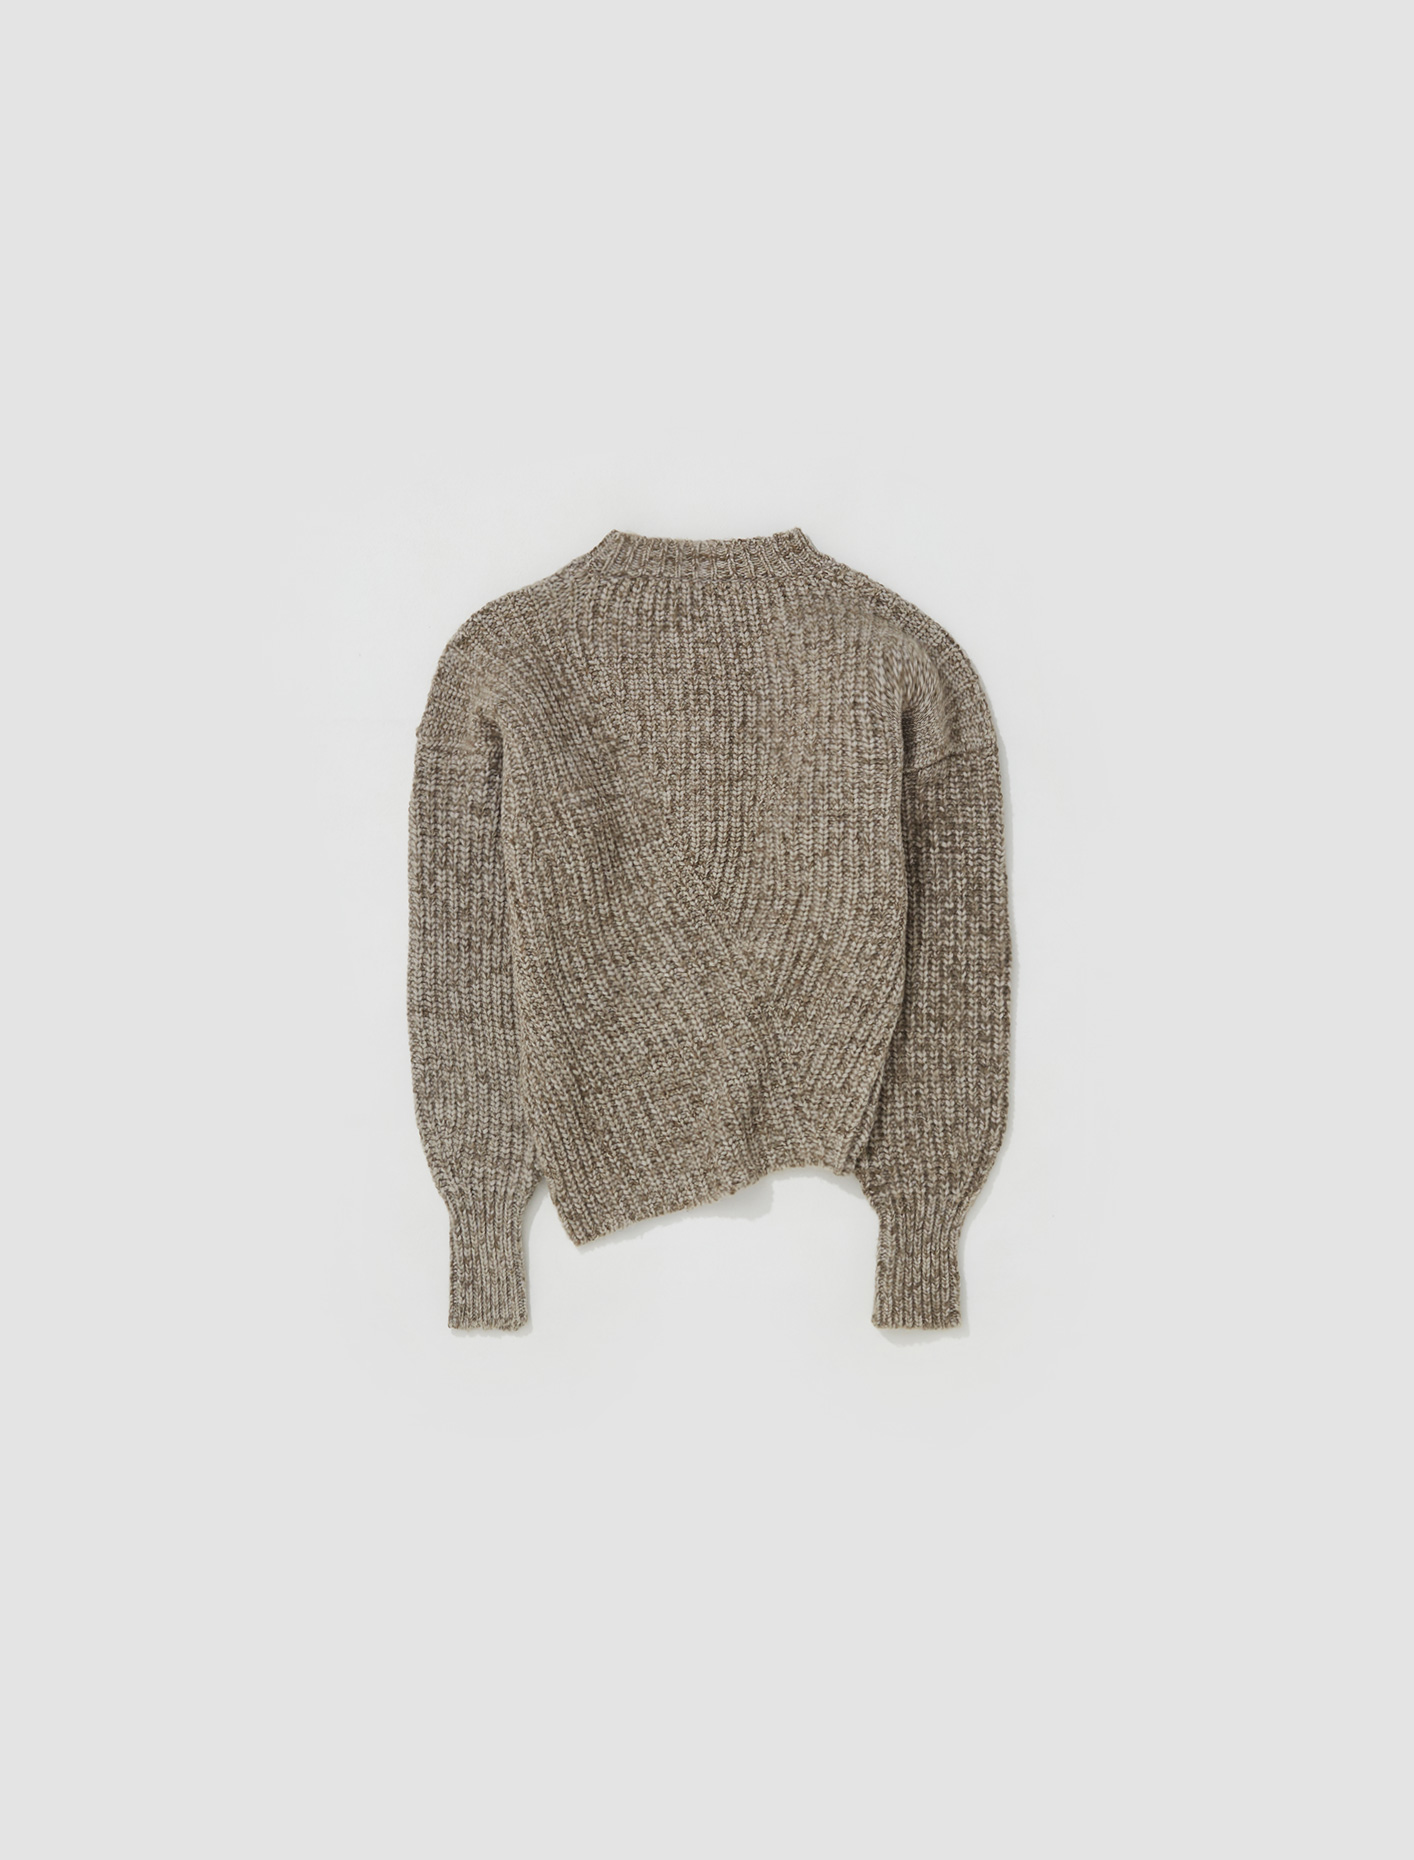 Paloma Wool Diago Knitted Sweater in Brown Voo Store Berlin Worldwide  Shipping